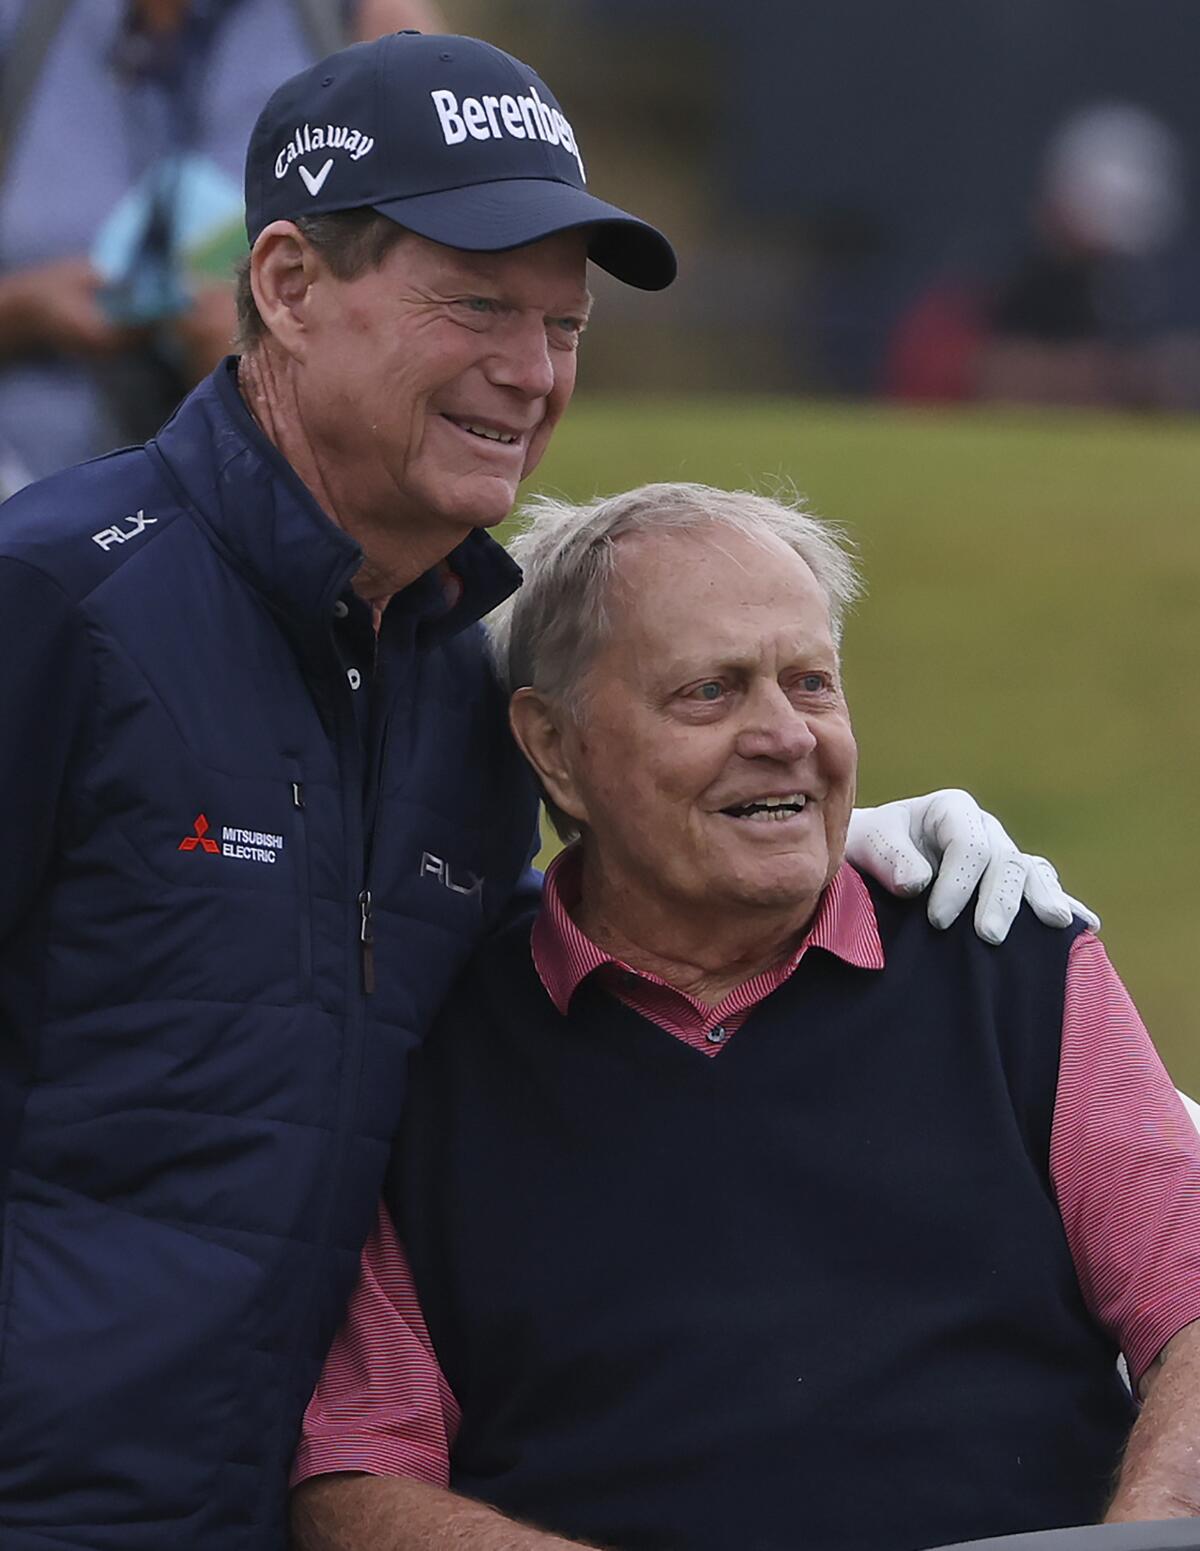 Golf legends Jack Nicklaus, right, and Tom Watson of United States pose for a photo during a 'Champions round' as preparations continue for the British Open golf championship on the Old Course at St. Andrews, Scotland, Monday July 11, 2022. The Open Championship returns to the home of golf on July 14-17, 2022, to celebrate the 150th edition of the sport's oldest championship, which dates to 1860 and was first played at St. Andrews in 1873. (AP Photo/Peter Morrison)